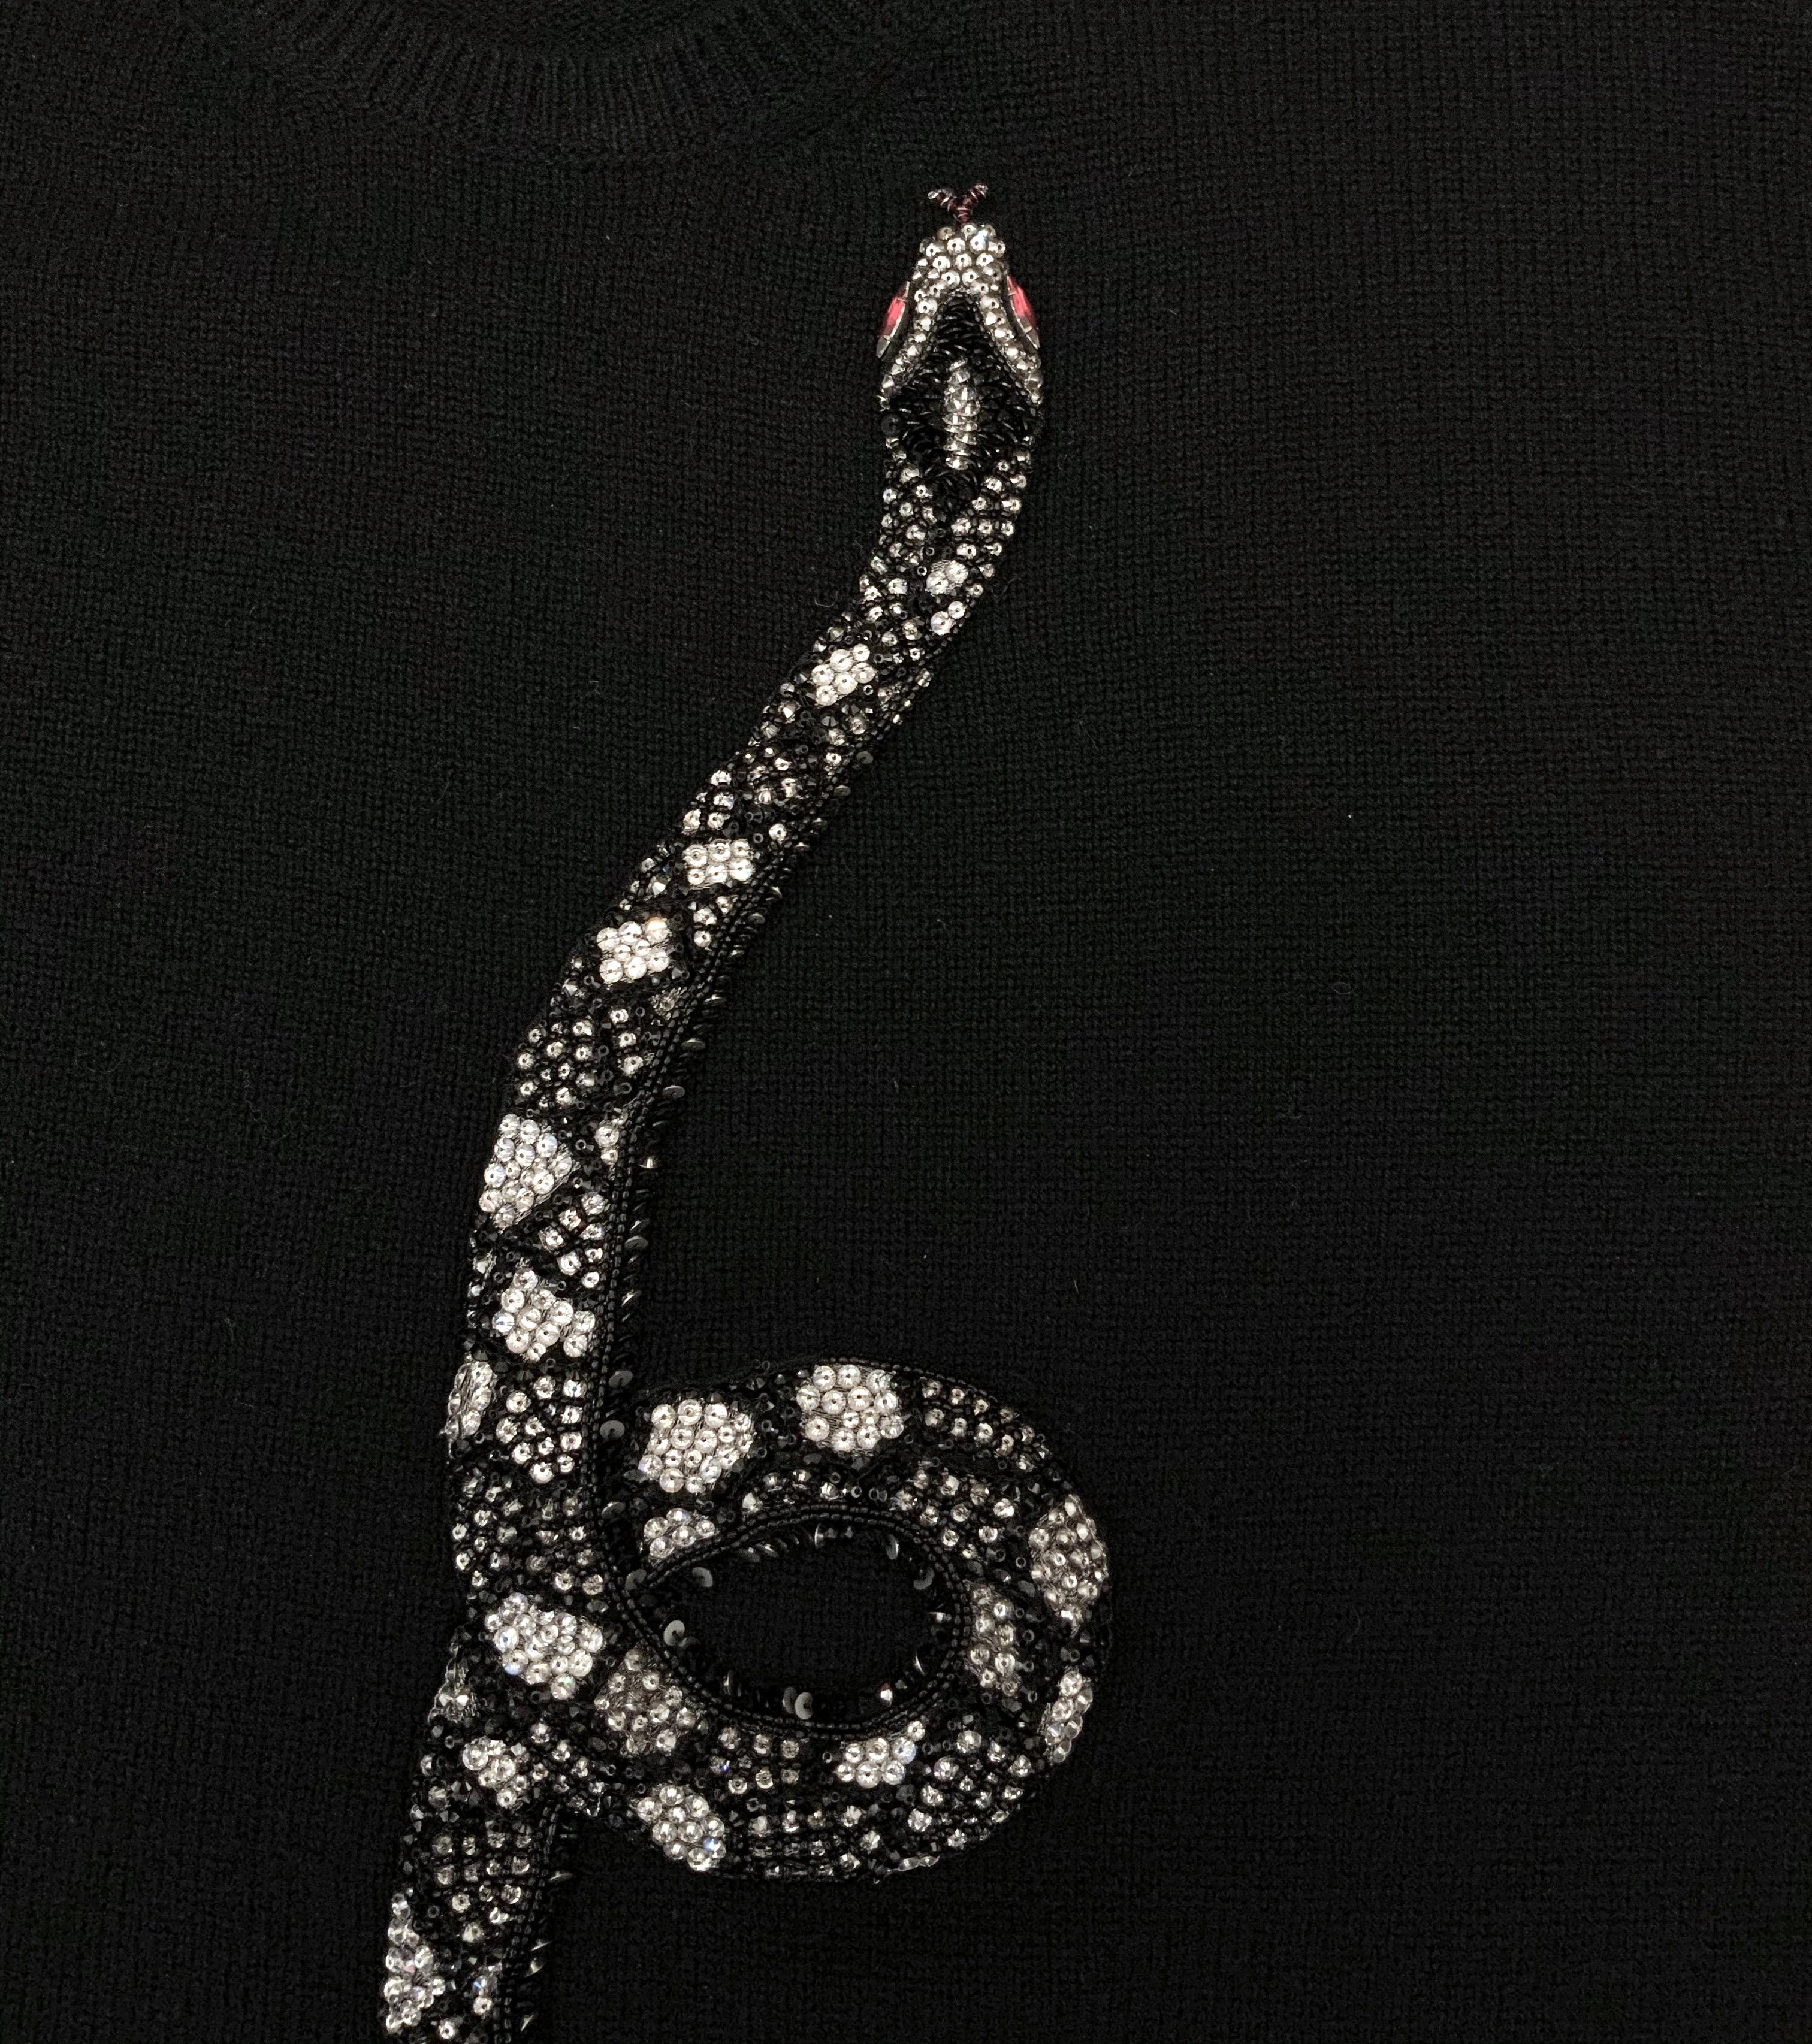 This Limited Edition back cashmere sweater from the house of Valentino shows an embroidered snake design. 
This snake detail is a re-edition of an archival embroidered motif from the Haute Couture FW 1971-72 collection 

Collection: Re-edition of